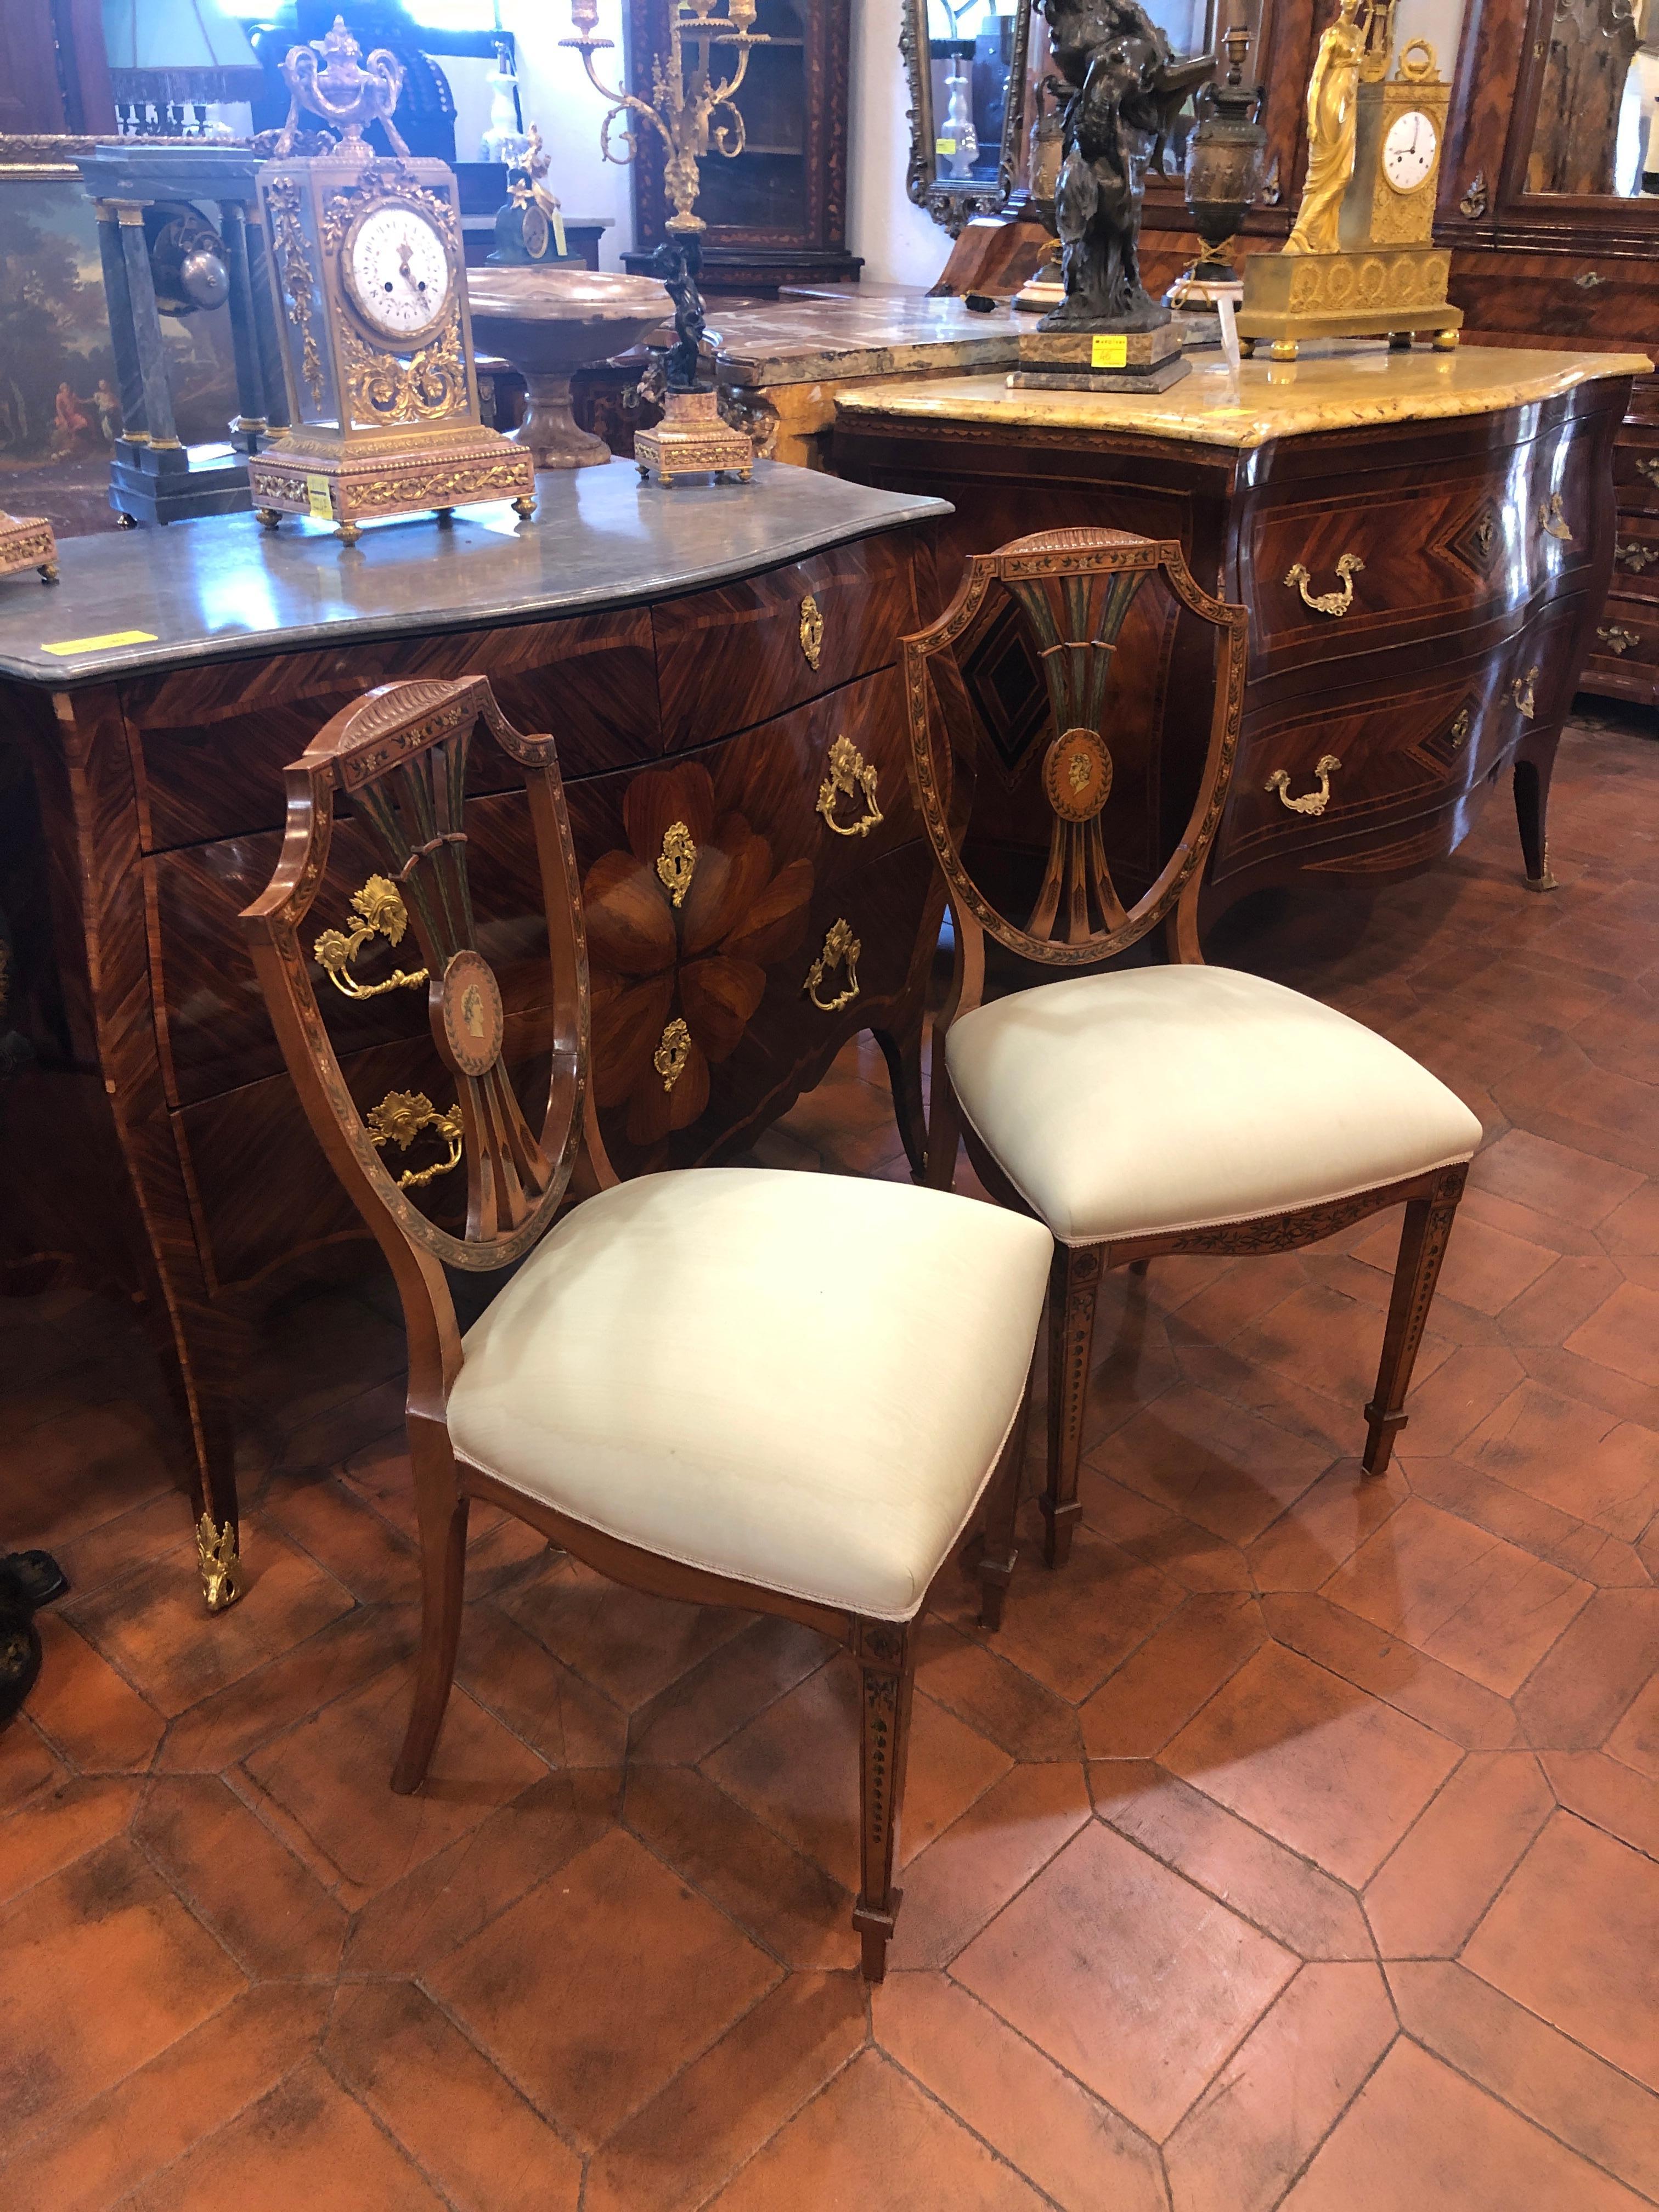 Fantastic pair of English satinwood chairs, in full Adams style, are hand-decorated and finely painted. Note the characteristic features of the most flourishing and important period of the 